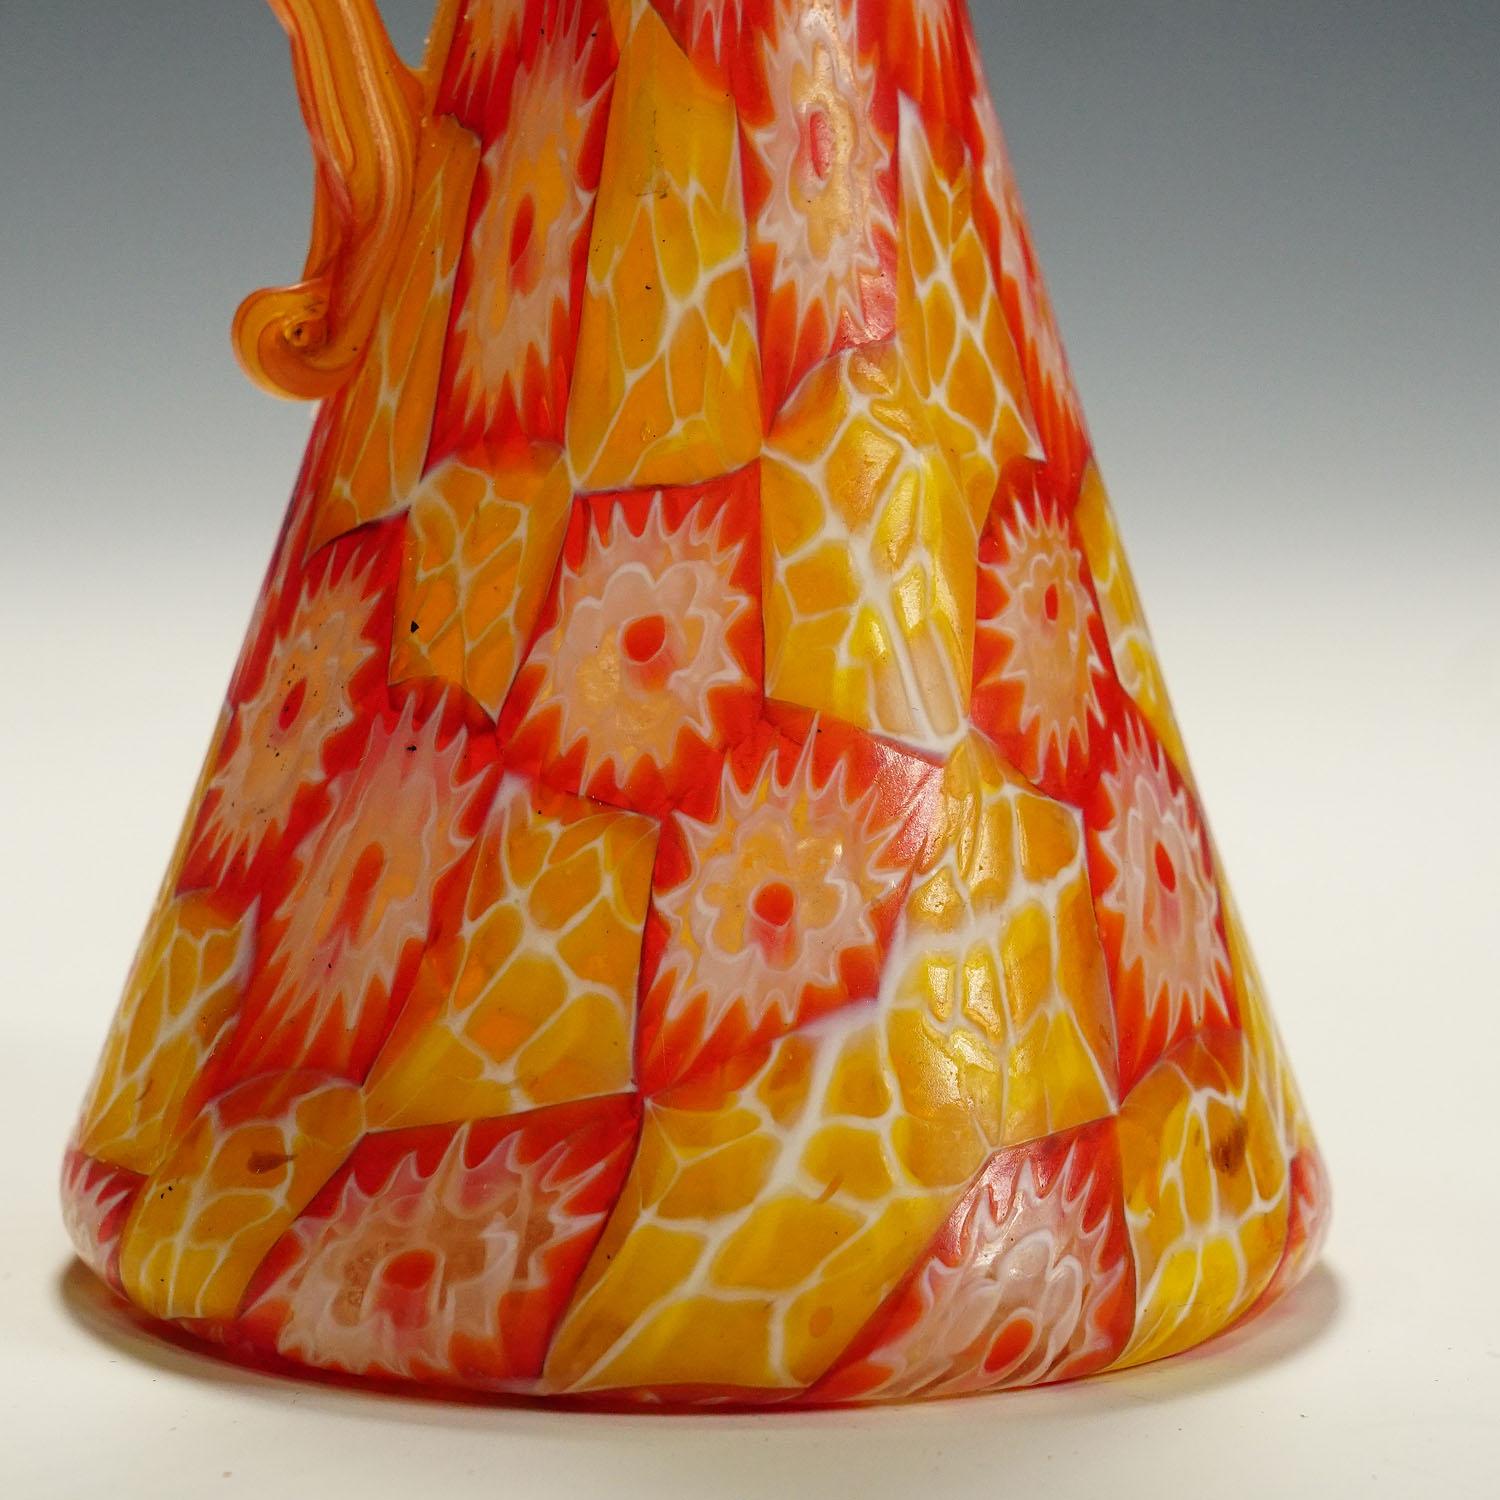 Art Glass Antique Millefiori Jug with Handles by Fratelli Toso, Murano, circa 1920 For Sale